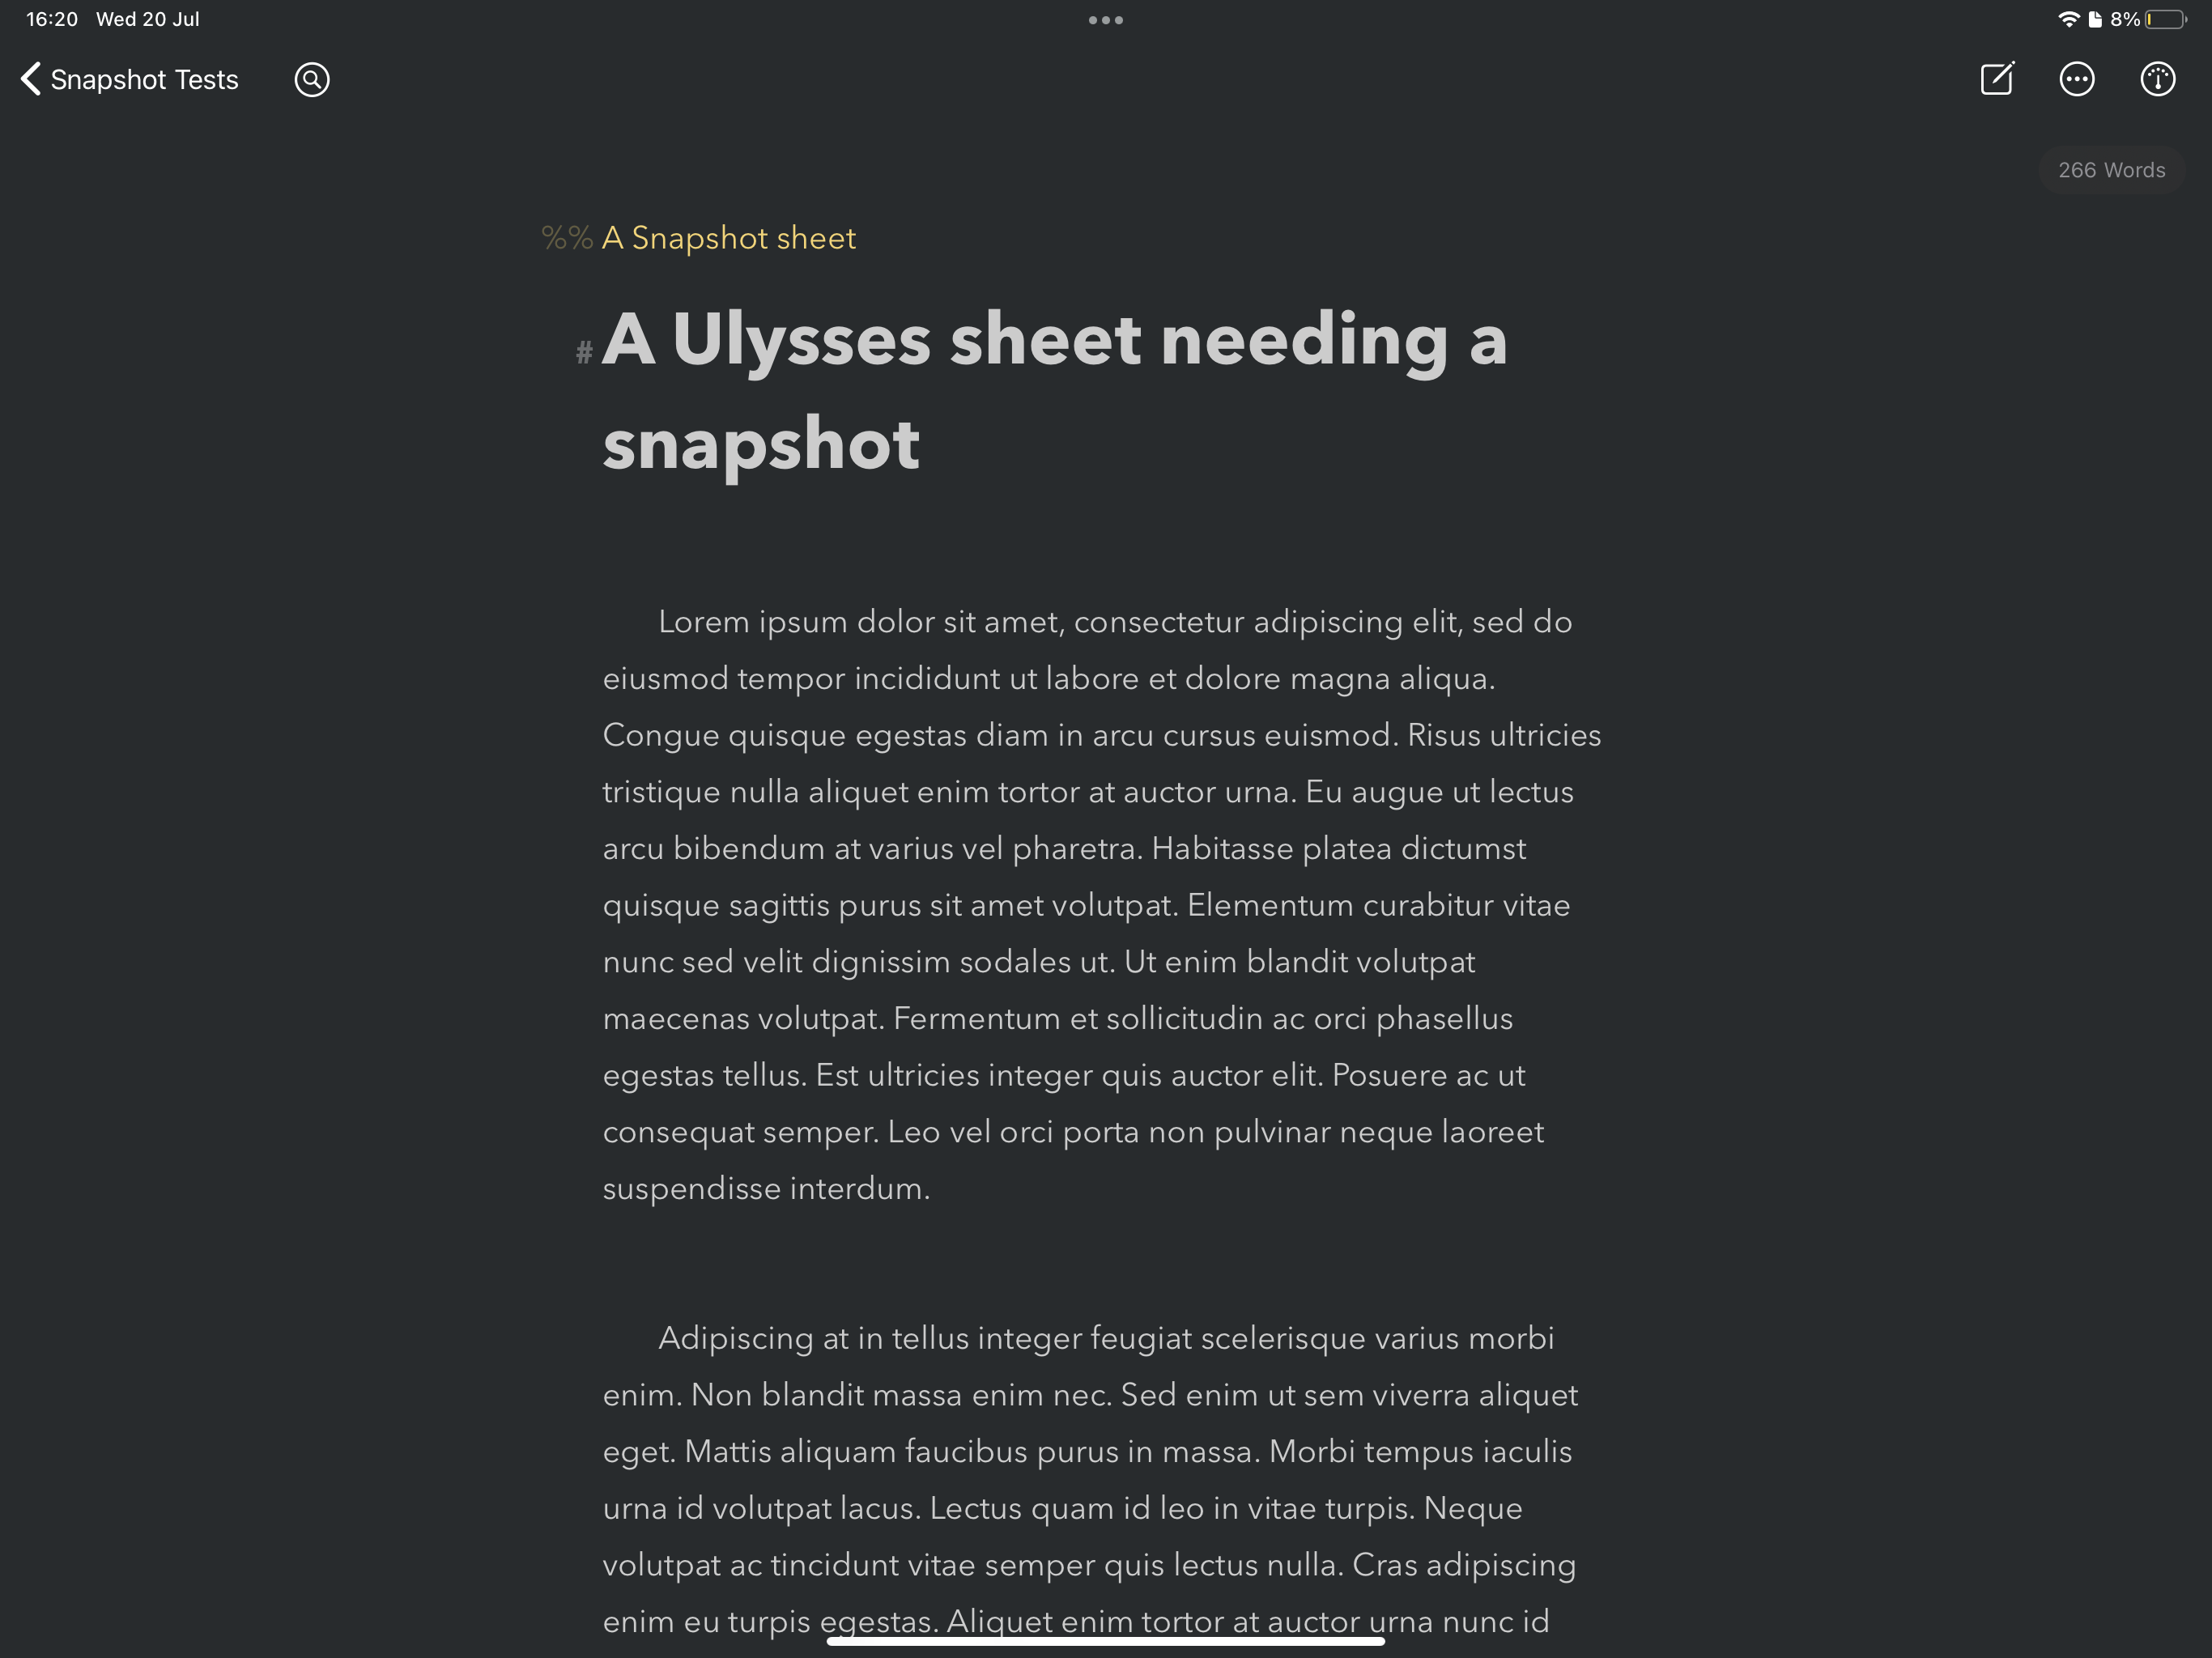 A sheet which needs a snapshot in Ulysses